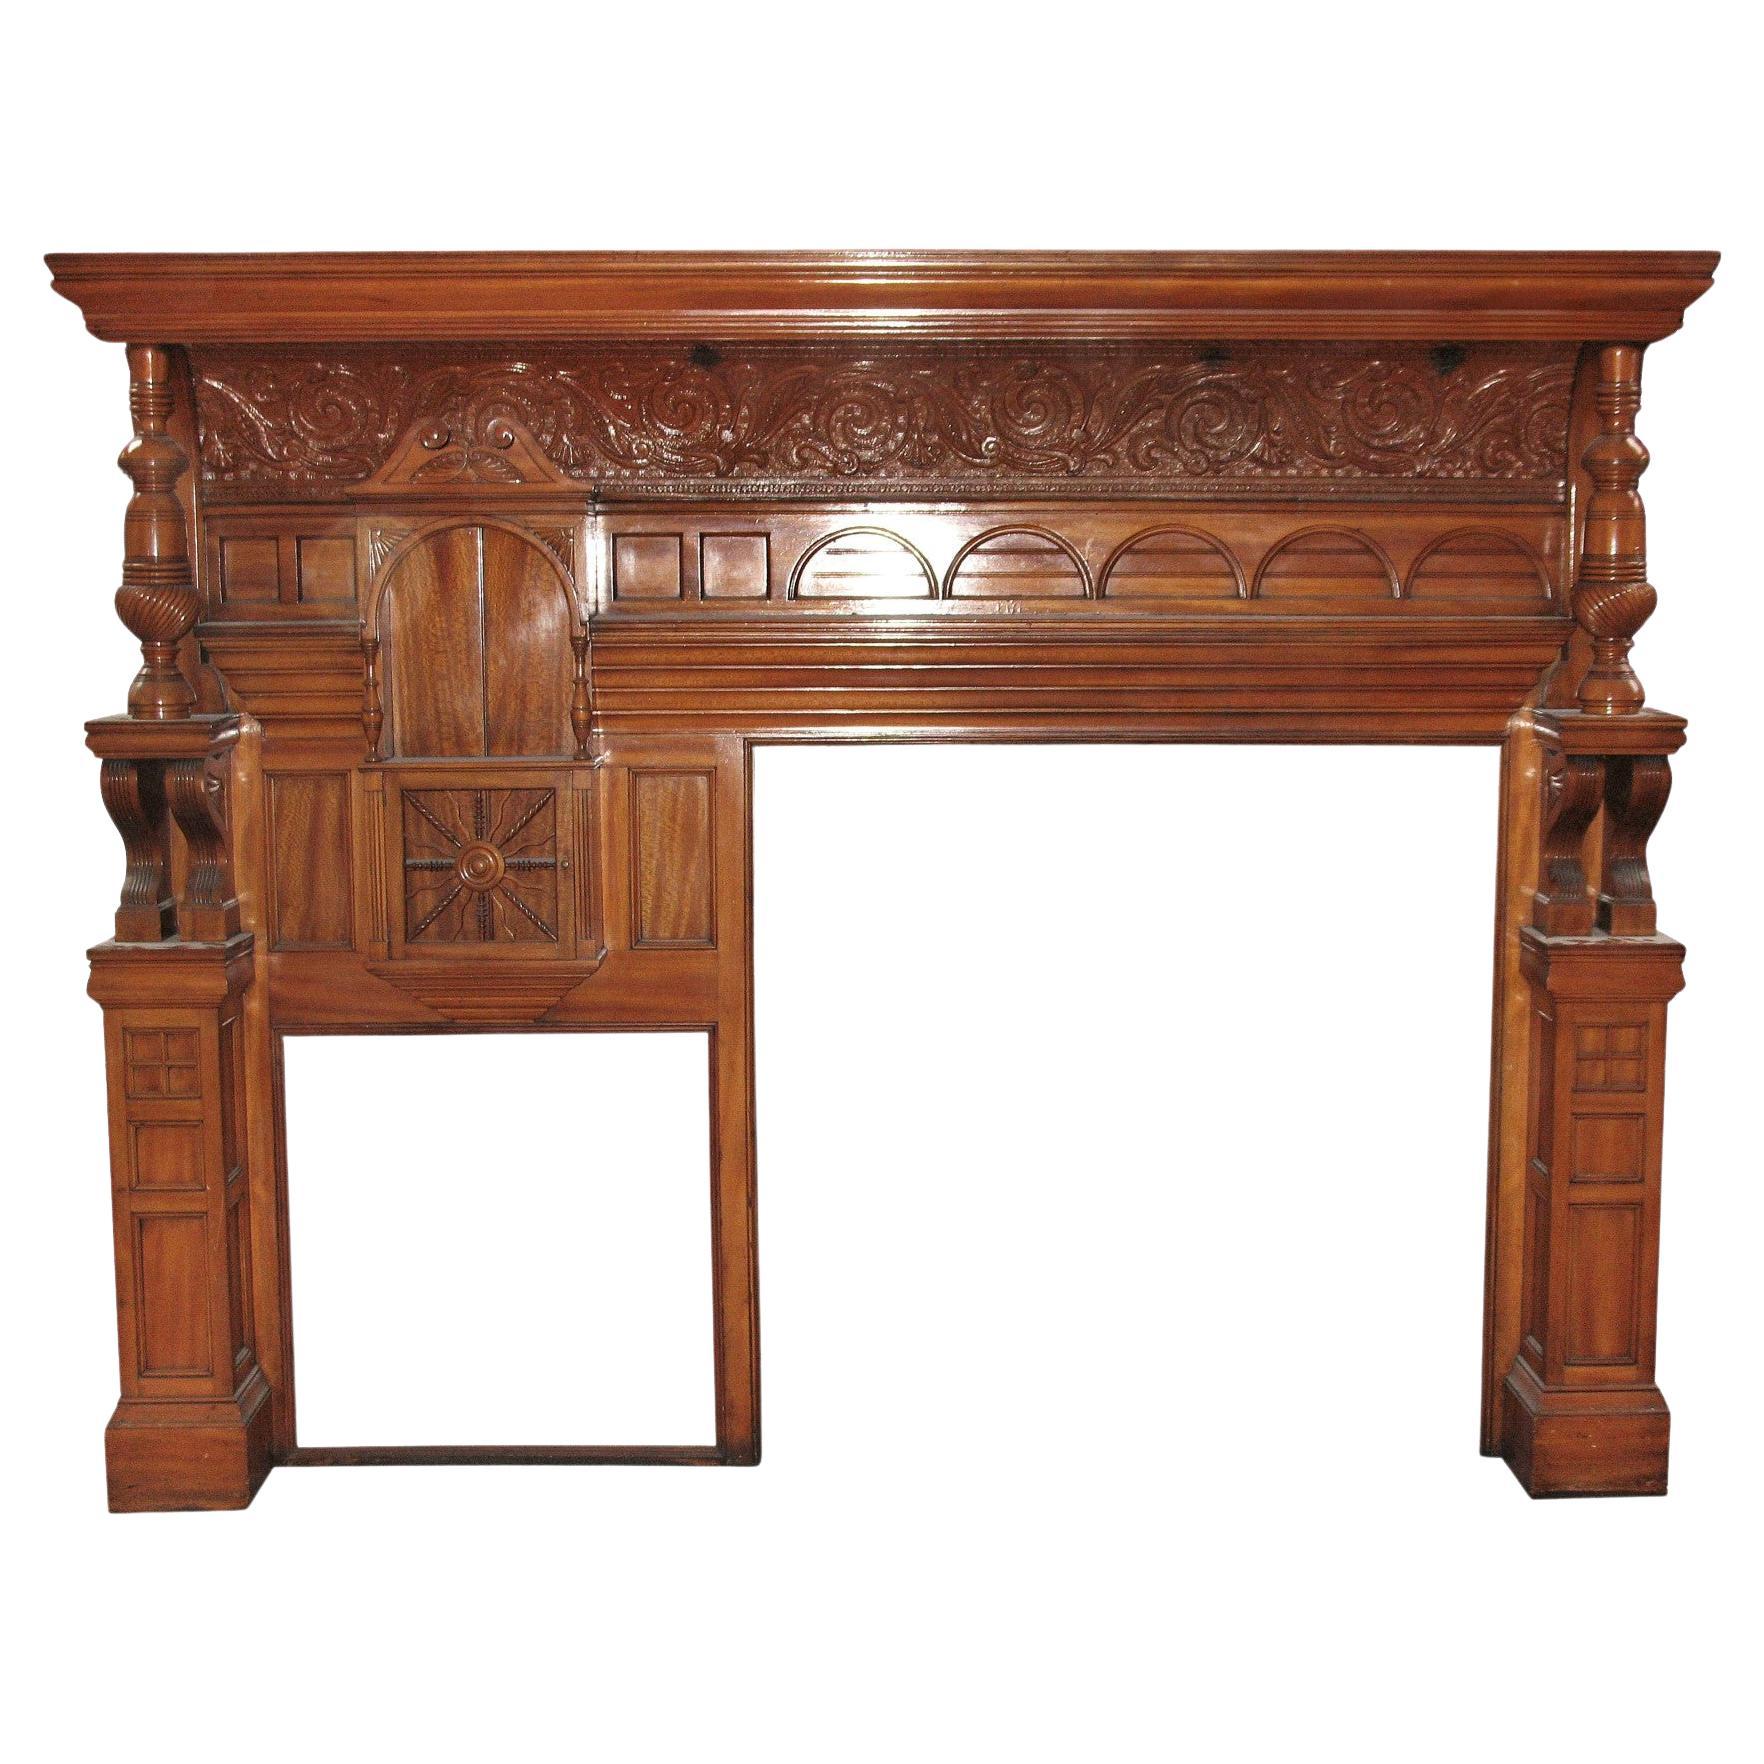 Victorian Carved Whimsical Maple Mantel Turned Columns and Corbels For Sale